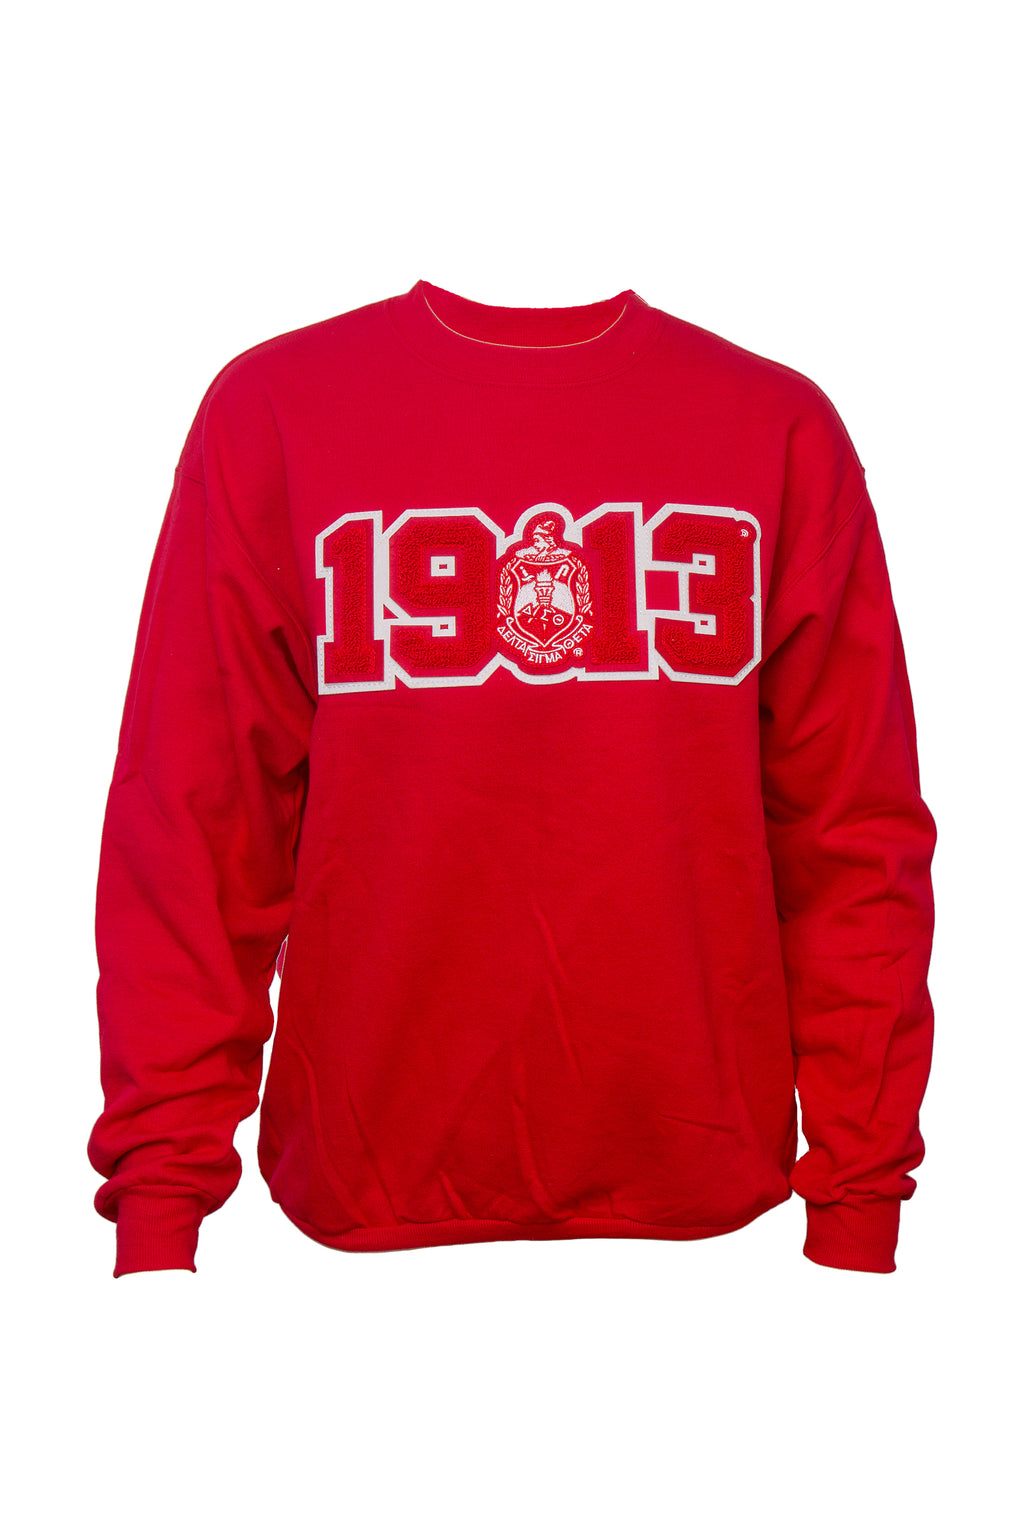 Delta Sigma Theta Sweatshirt with 1913 Chenille Patch – Greek Traditions